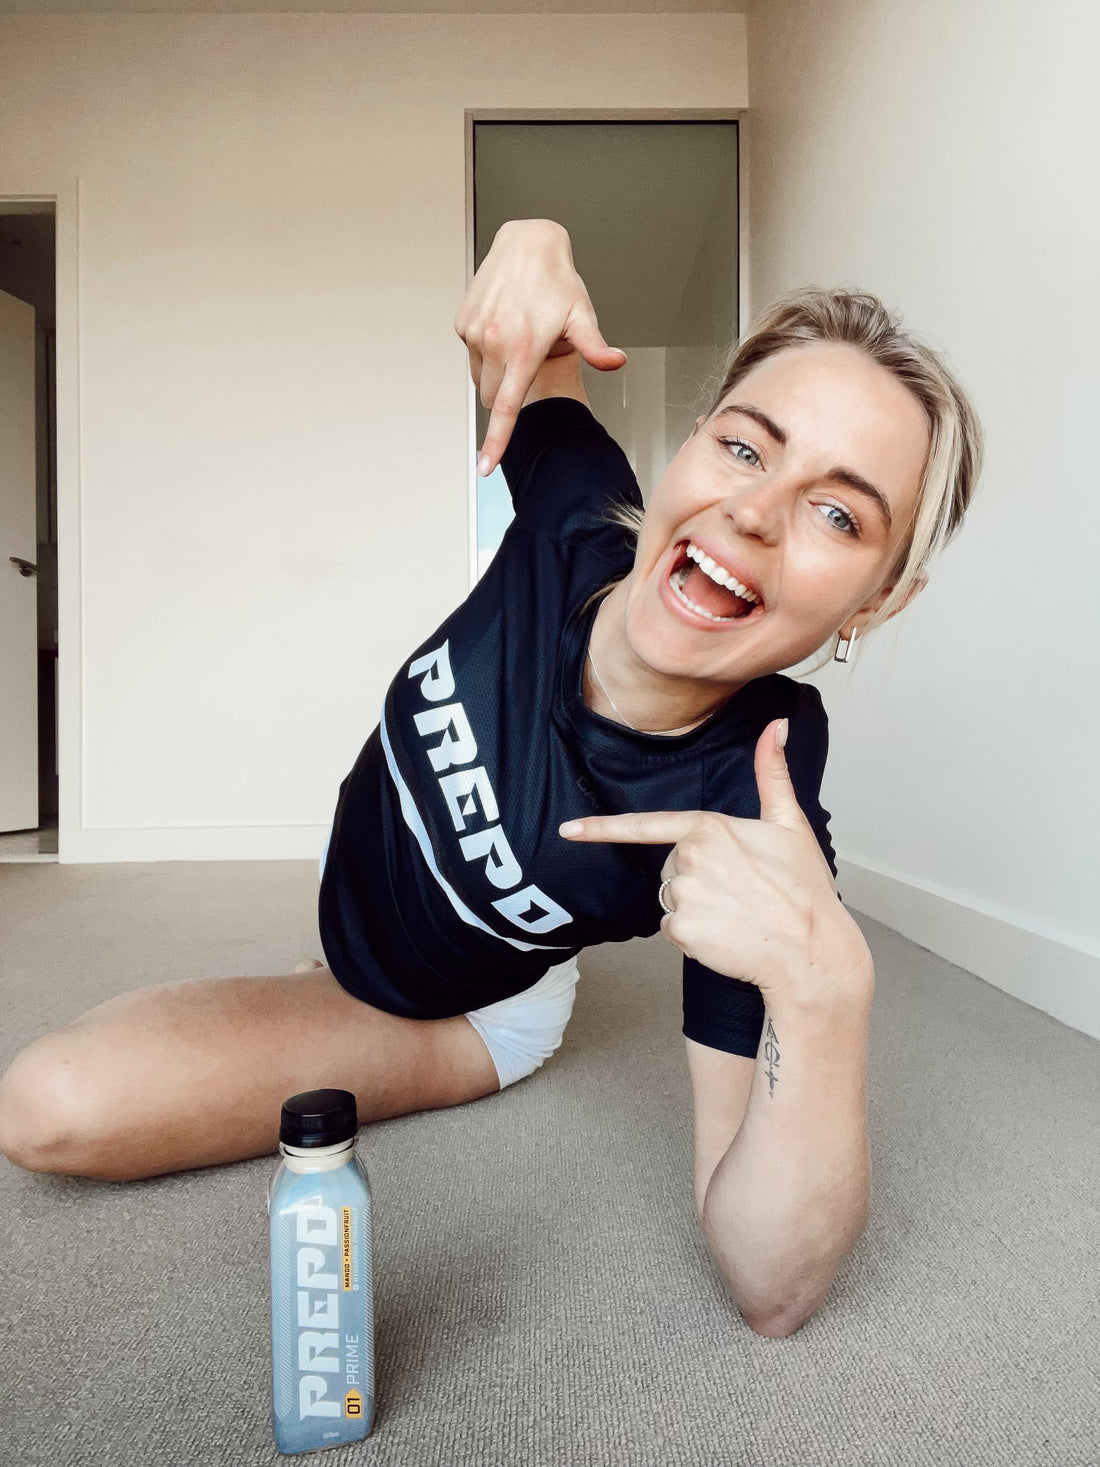 sarah jeavons wearing prepd shirt and prepd bottle